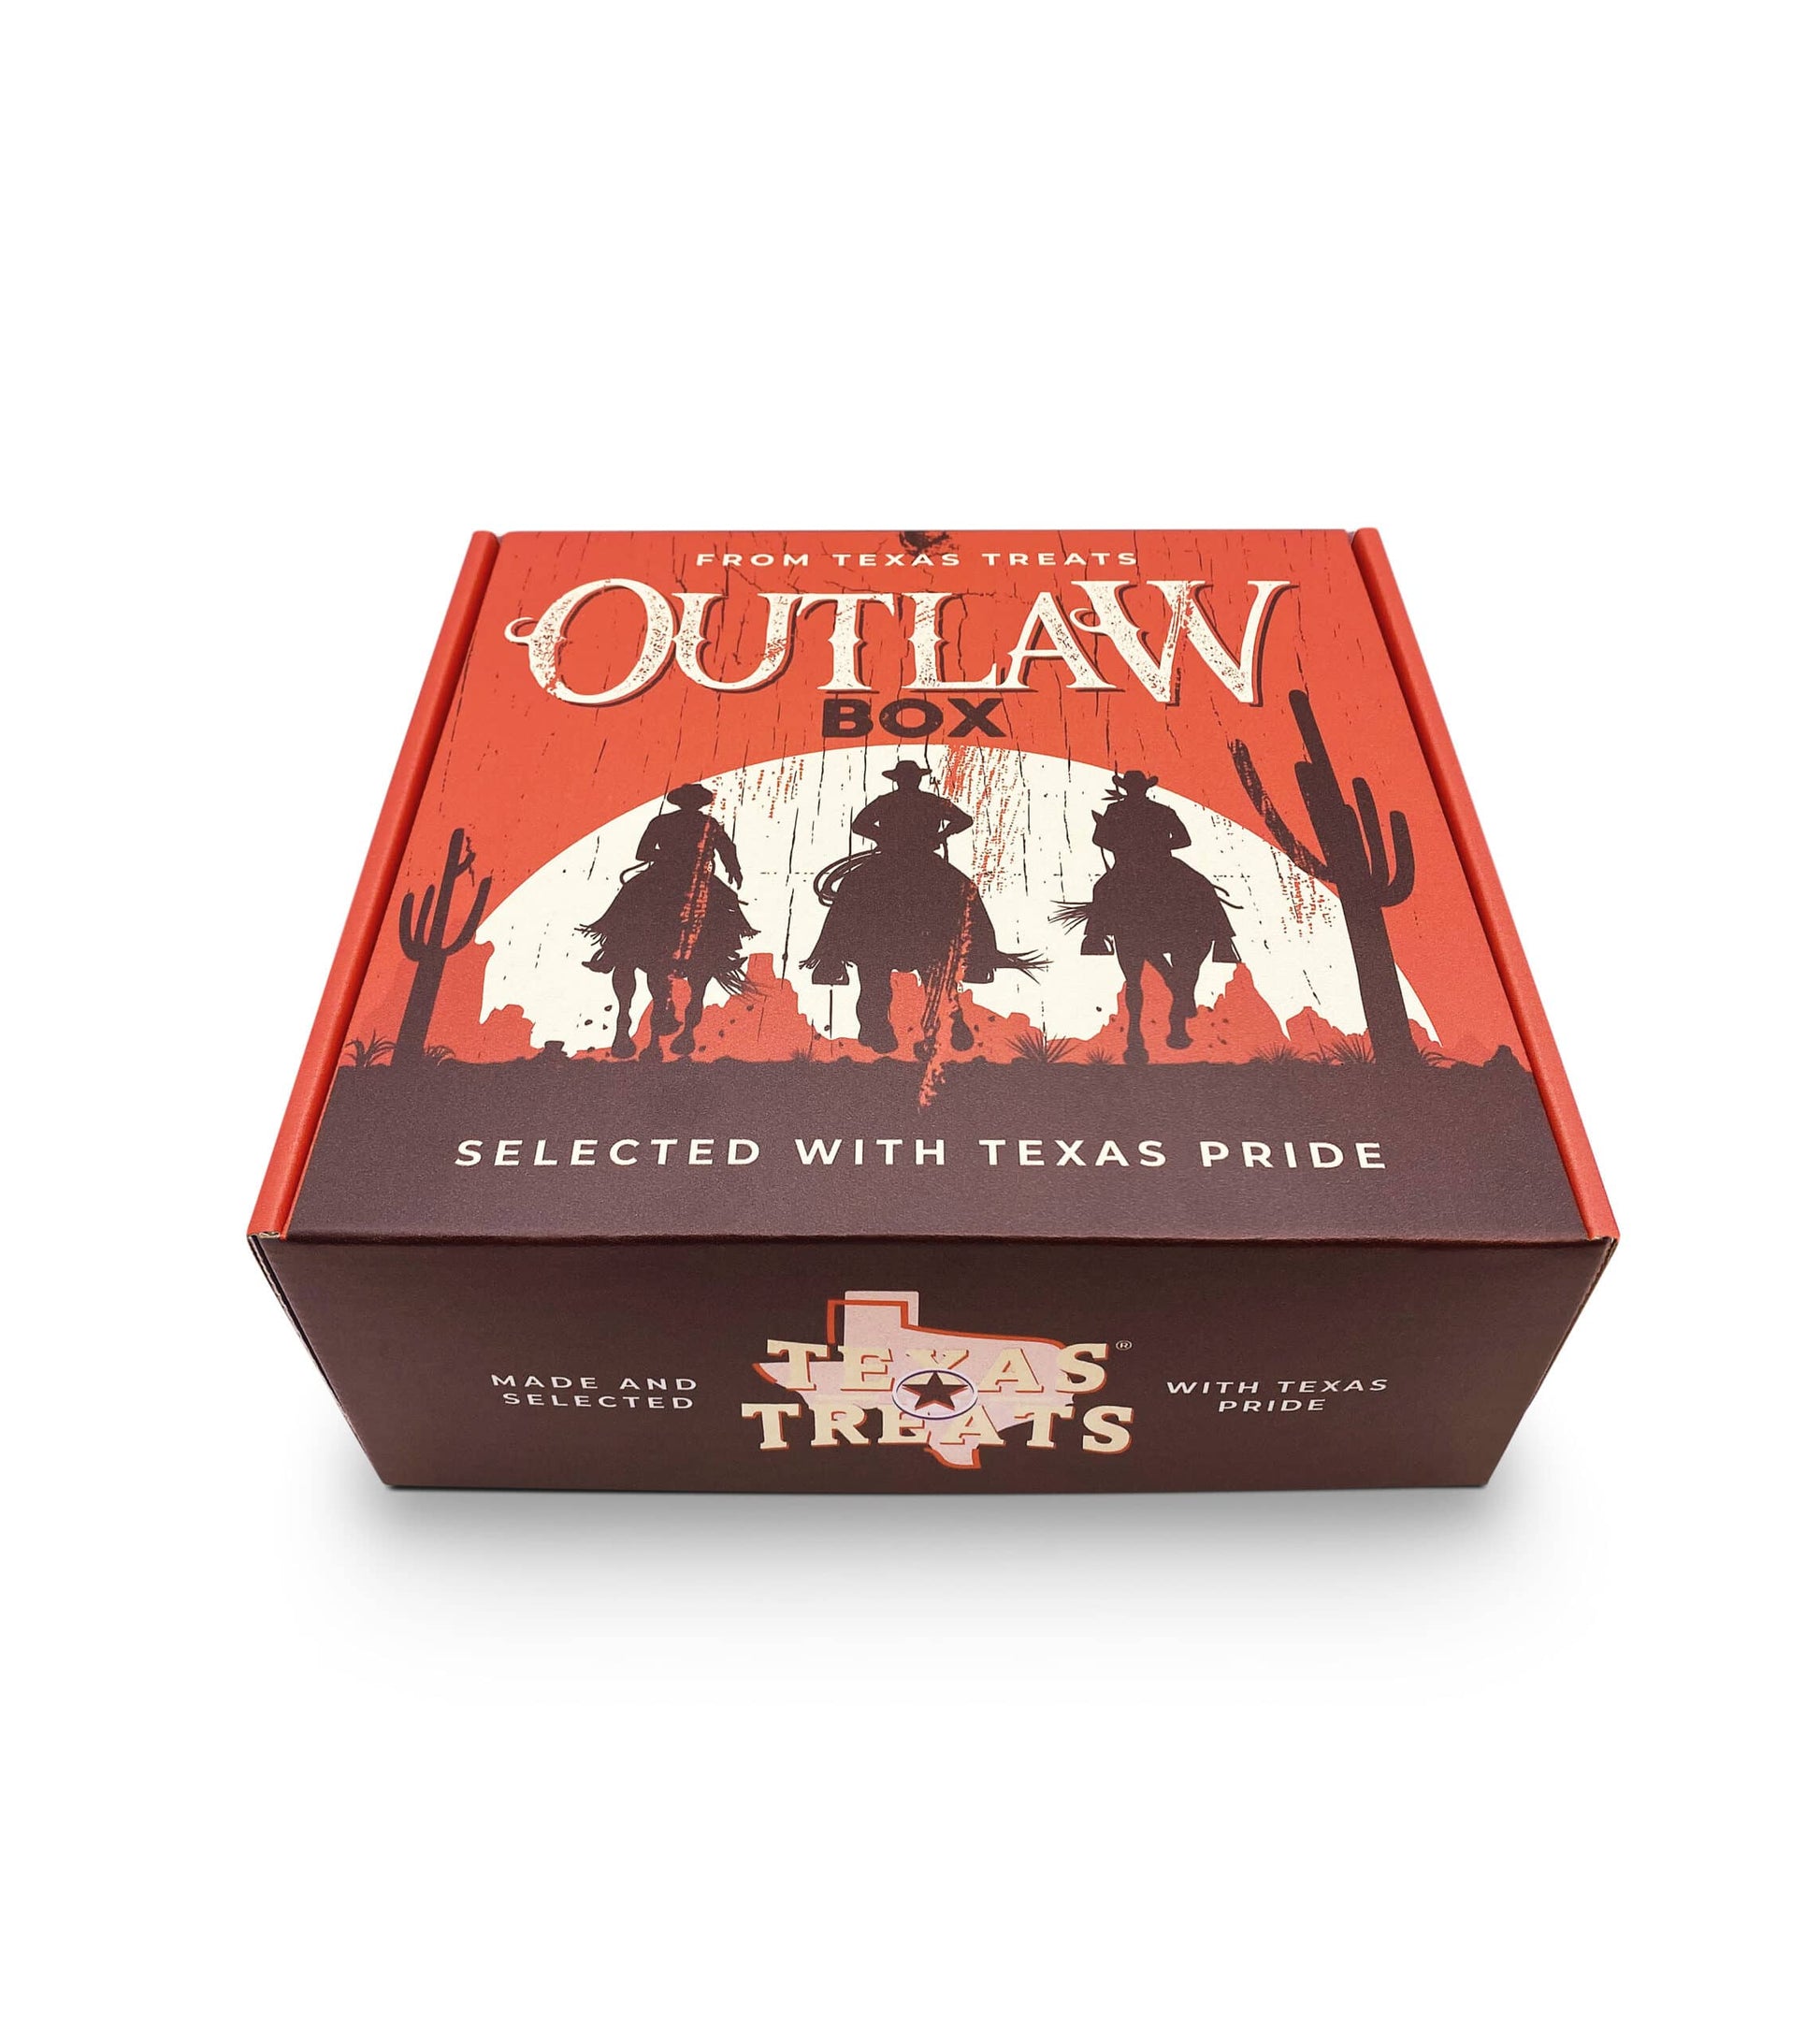 Texas Treats' Outlaw box – available for personal and corporate gifting.